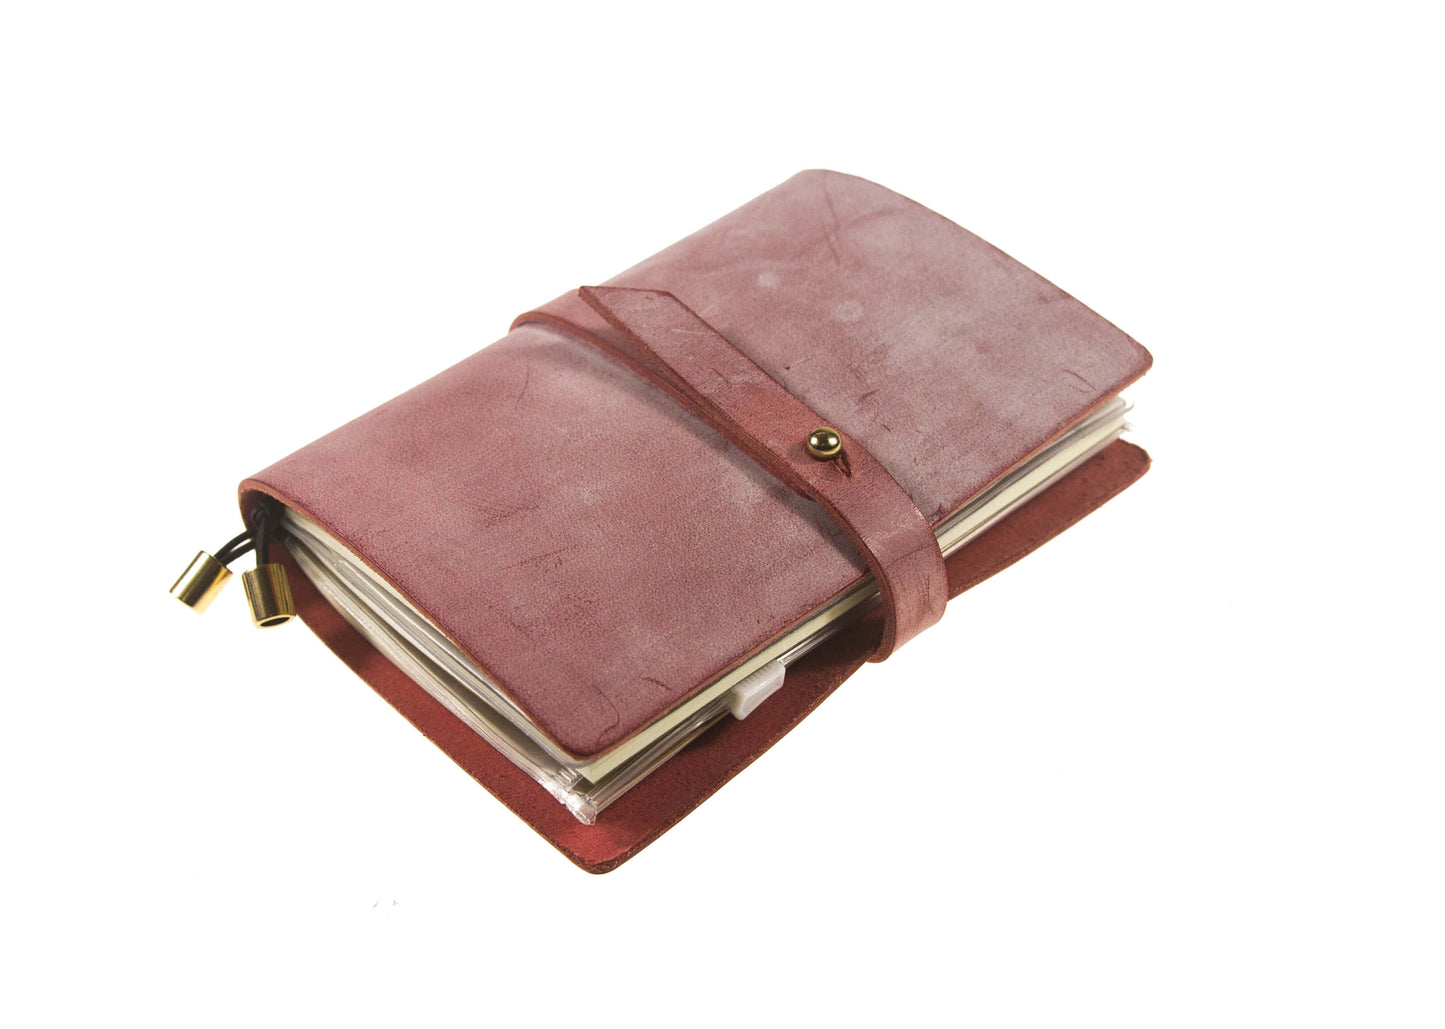 [Planner-Small] Leather Journal Planner Organizer - Academic Monthly Calendar & Weekly & Daily Pink